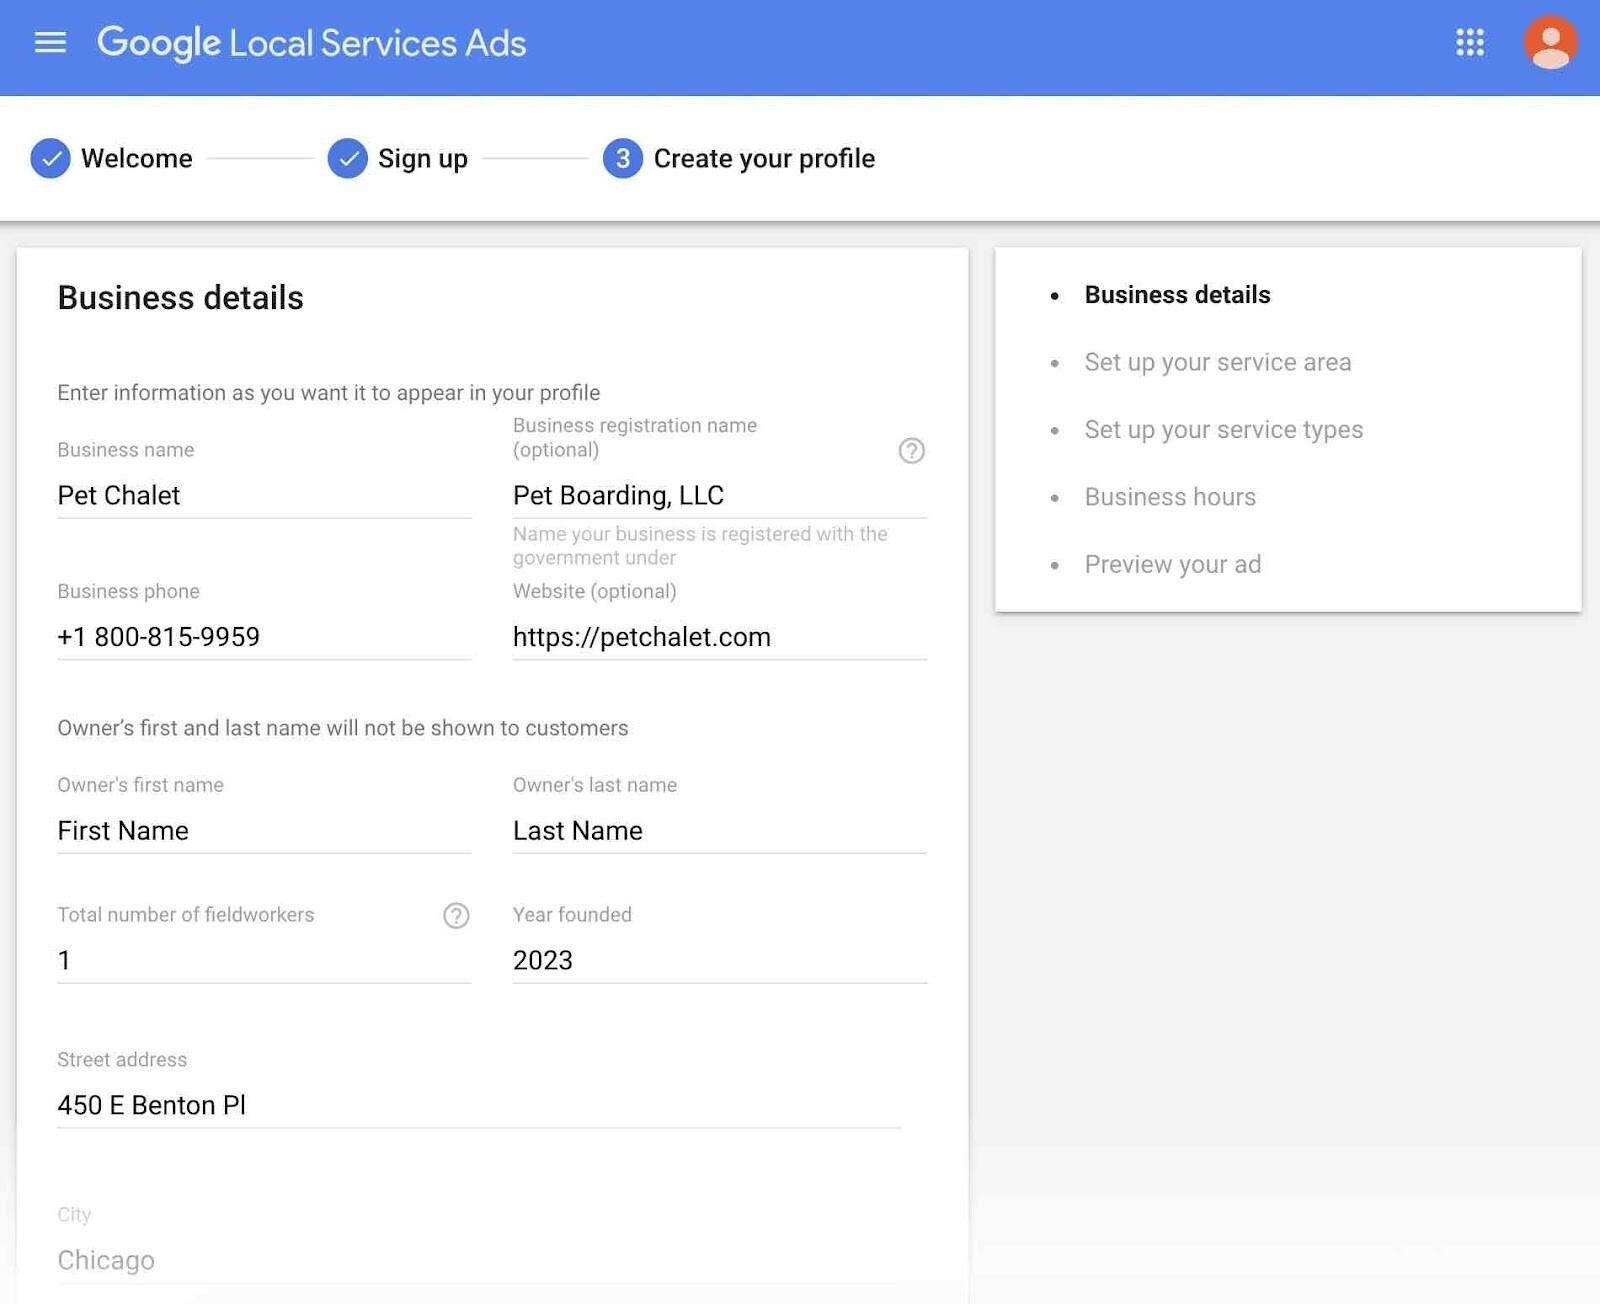 Business details in Google Local Services Ads